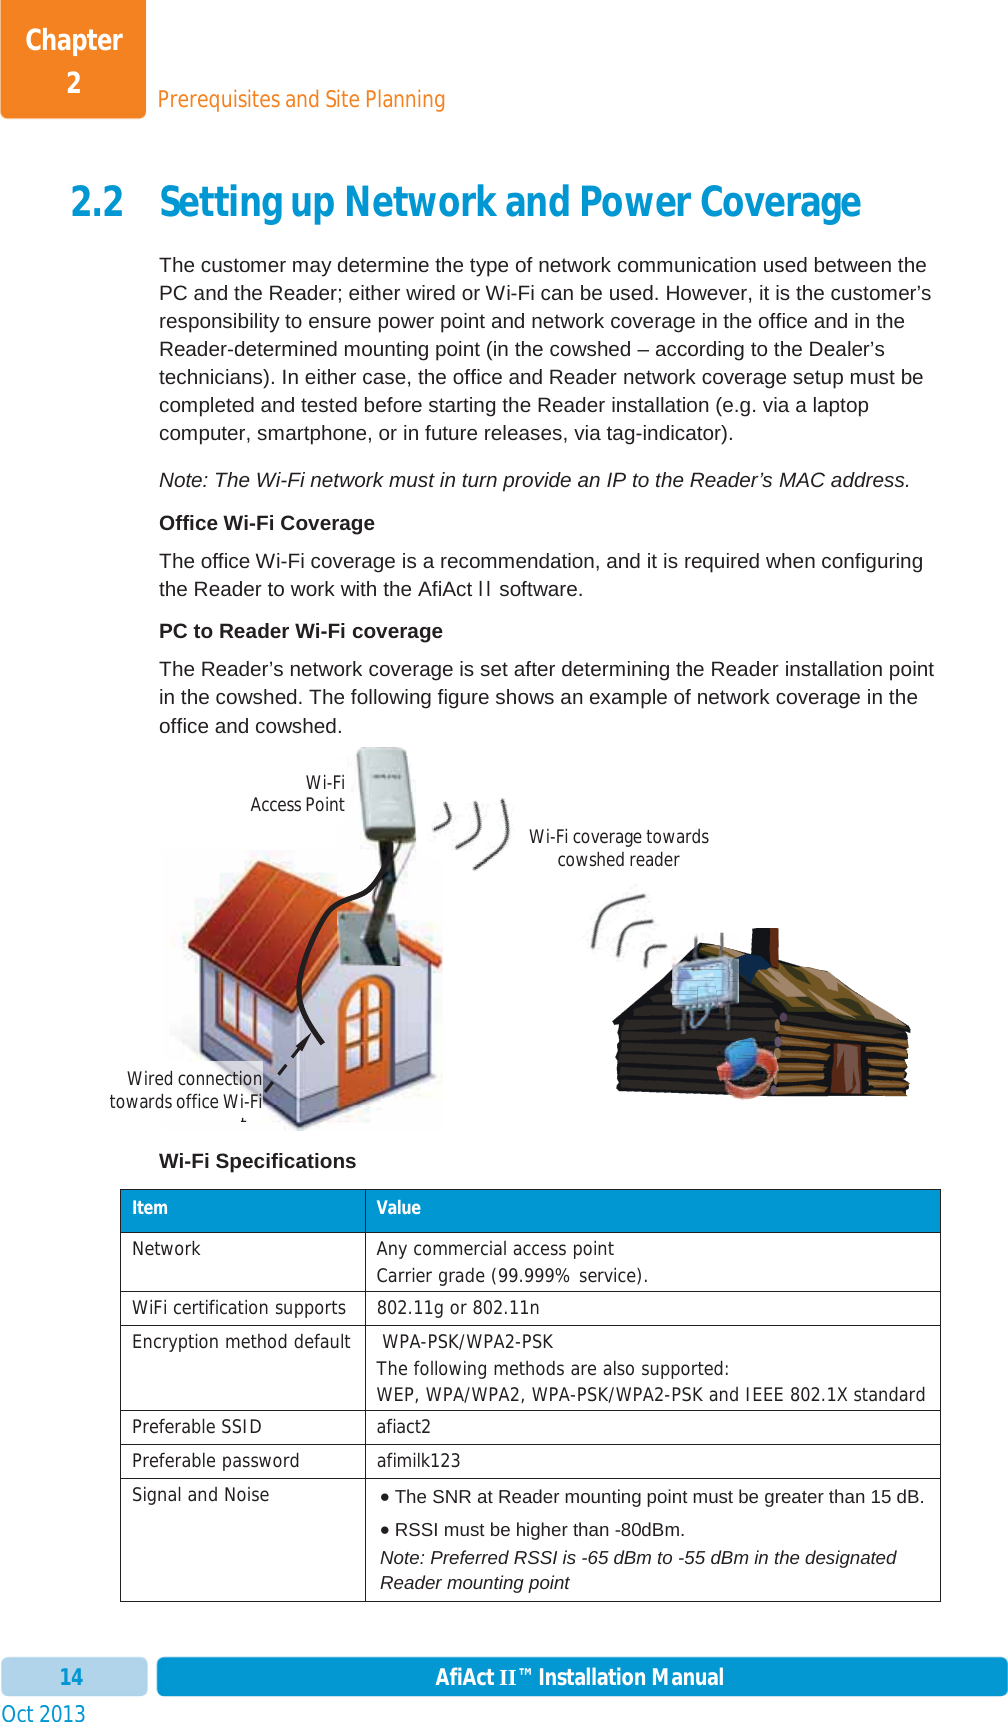 Prerequisites and Site PlanningChapter 2Oct 2013 AfiAct II™ Installation Manual142.2 Setting up Network and Power Coverage The customer may determine the type of network communication used between the PC and the Reader; either wired or Wi-Fi can be used. However, it is the customer’s responsibility to ensure power point and network coverage in the office and in the Reader-determined mounting point (in the cowshed – according to the Dealer’s technicians). In either case, the office and Reader network coverage setup must be completed and tested before starting the Reader installation (e.g. via a laptop computer, smartphone, or in future releases, via tag-indicator). Note: The Wi-Fi network must in turn provide an IP to the Reader’s MAC address.Office Wi-Fi Coverage The office Wi-Fi coverage is a recommendation, and it is required when configuring the Reader to work with the AfiAct II software. PC to Reader Wi-Fi coverage The Reader’s network coverage is set after determining the Reader installation point in the cowshed. The following figure shows an example of network coverage in the office and cowshed.  Wi-Fi Specifications Item Value Network  Any commercial access point Carrier grade (99.999% service). WiFi certification supports  802.11g or 802.11n Encryption method default   WPA-PSK/WPA2-PSK  The following methods are also supported: WEP, WPA/WPA2, WPA-PSK/WPA2-PSK and IEEE 802.1X standard Preferable SSID  afiact2 Preferable password afimilk123Signal and Noise  xThe SNR at Reader mounting point must be greater than 15 dB. xRSSI must be higher than -80dBm. Note: Preferred RSSI is -65 dBm to -55 dBm in the designated Reader mounting point Wi-Fi coverage towards cowshed reader Wired connectiontowards office Wi-FitWi-FiAccess Point